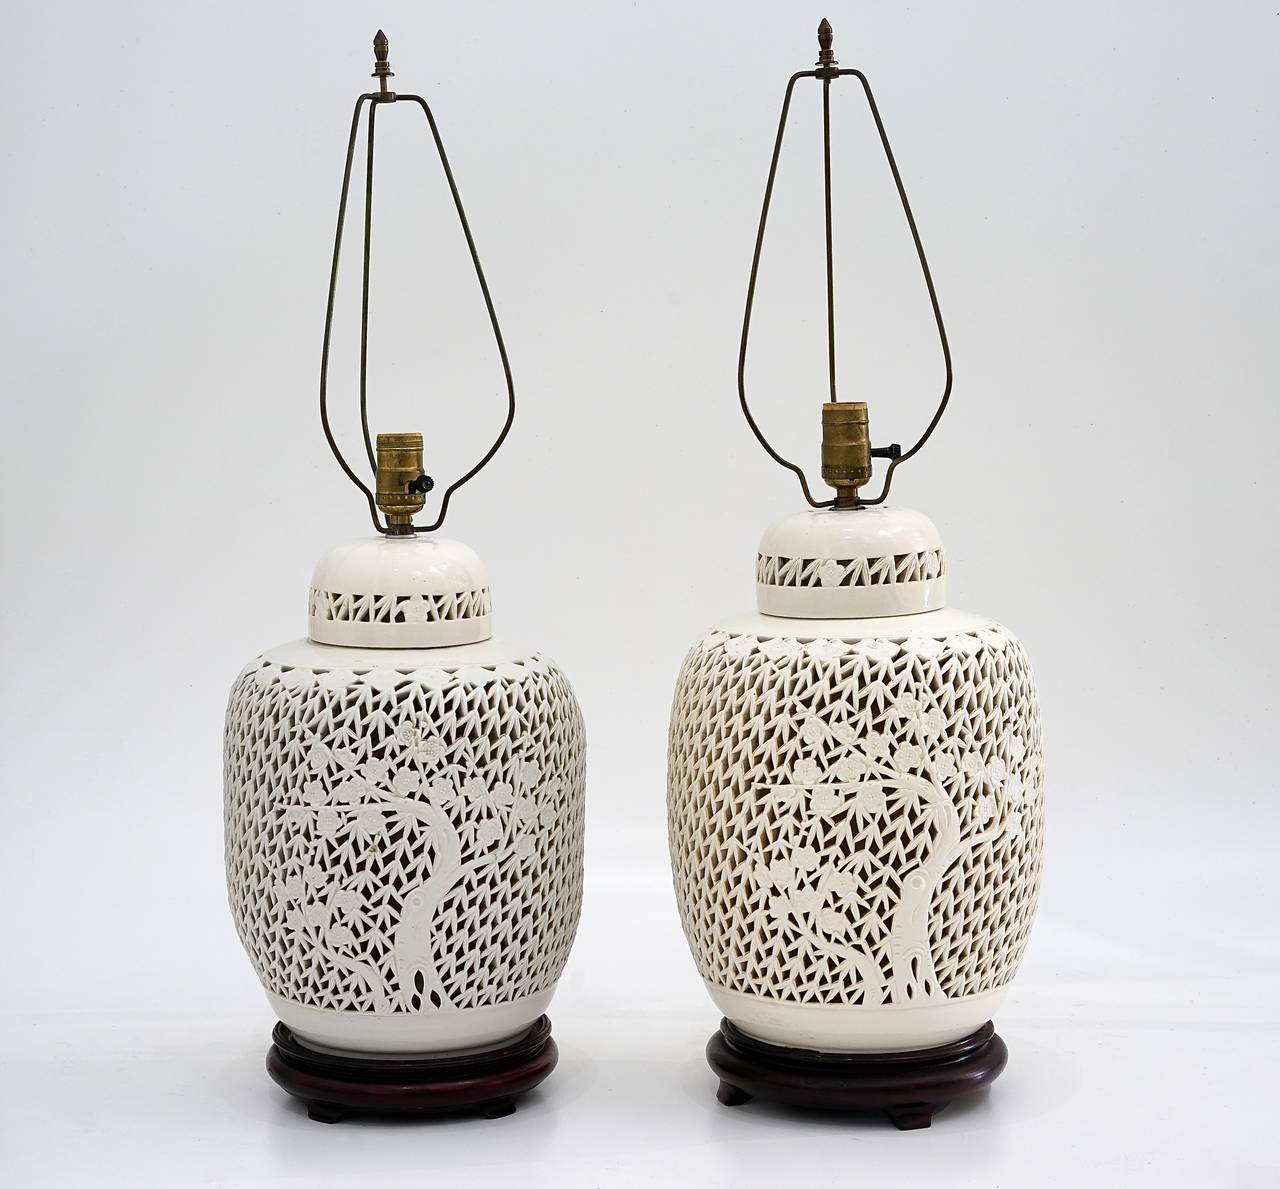 This pair of beautiful 1930's Blanc de Chine lidded ginger-jar's have been converted into table lamps.  These ginger-jars are glazed-ceramic in an off-white coloration, with their original harps.   Each vase is pierced with a motif of